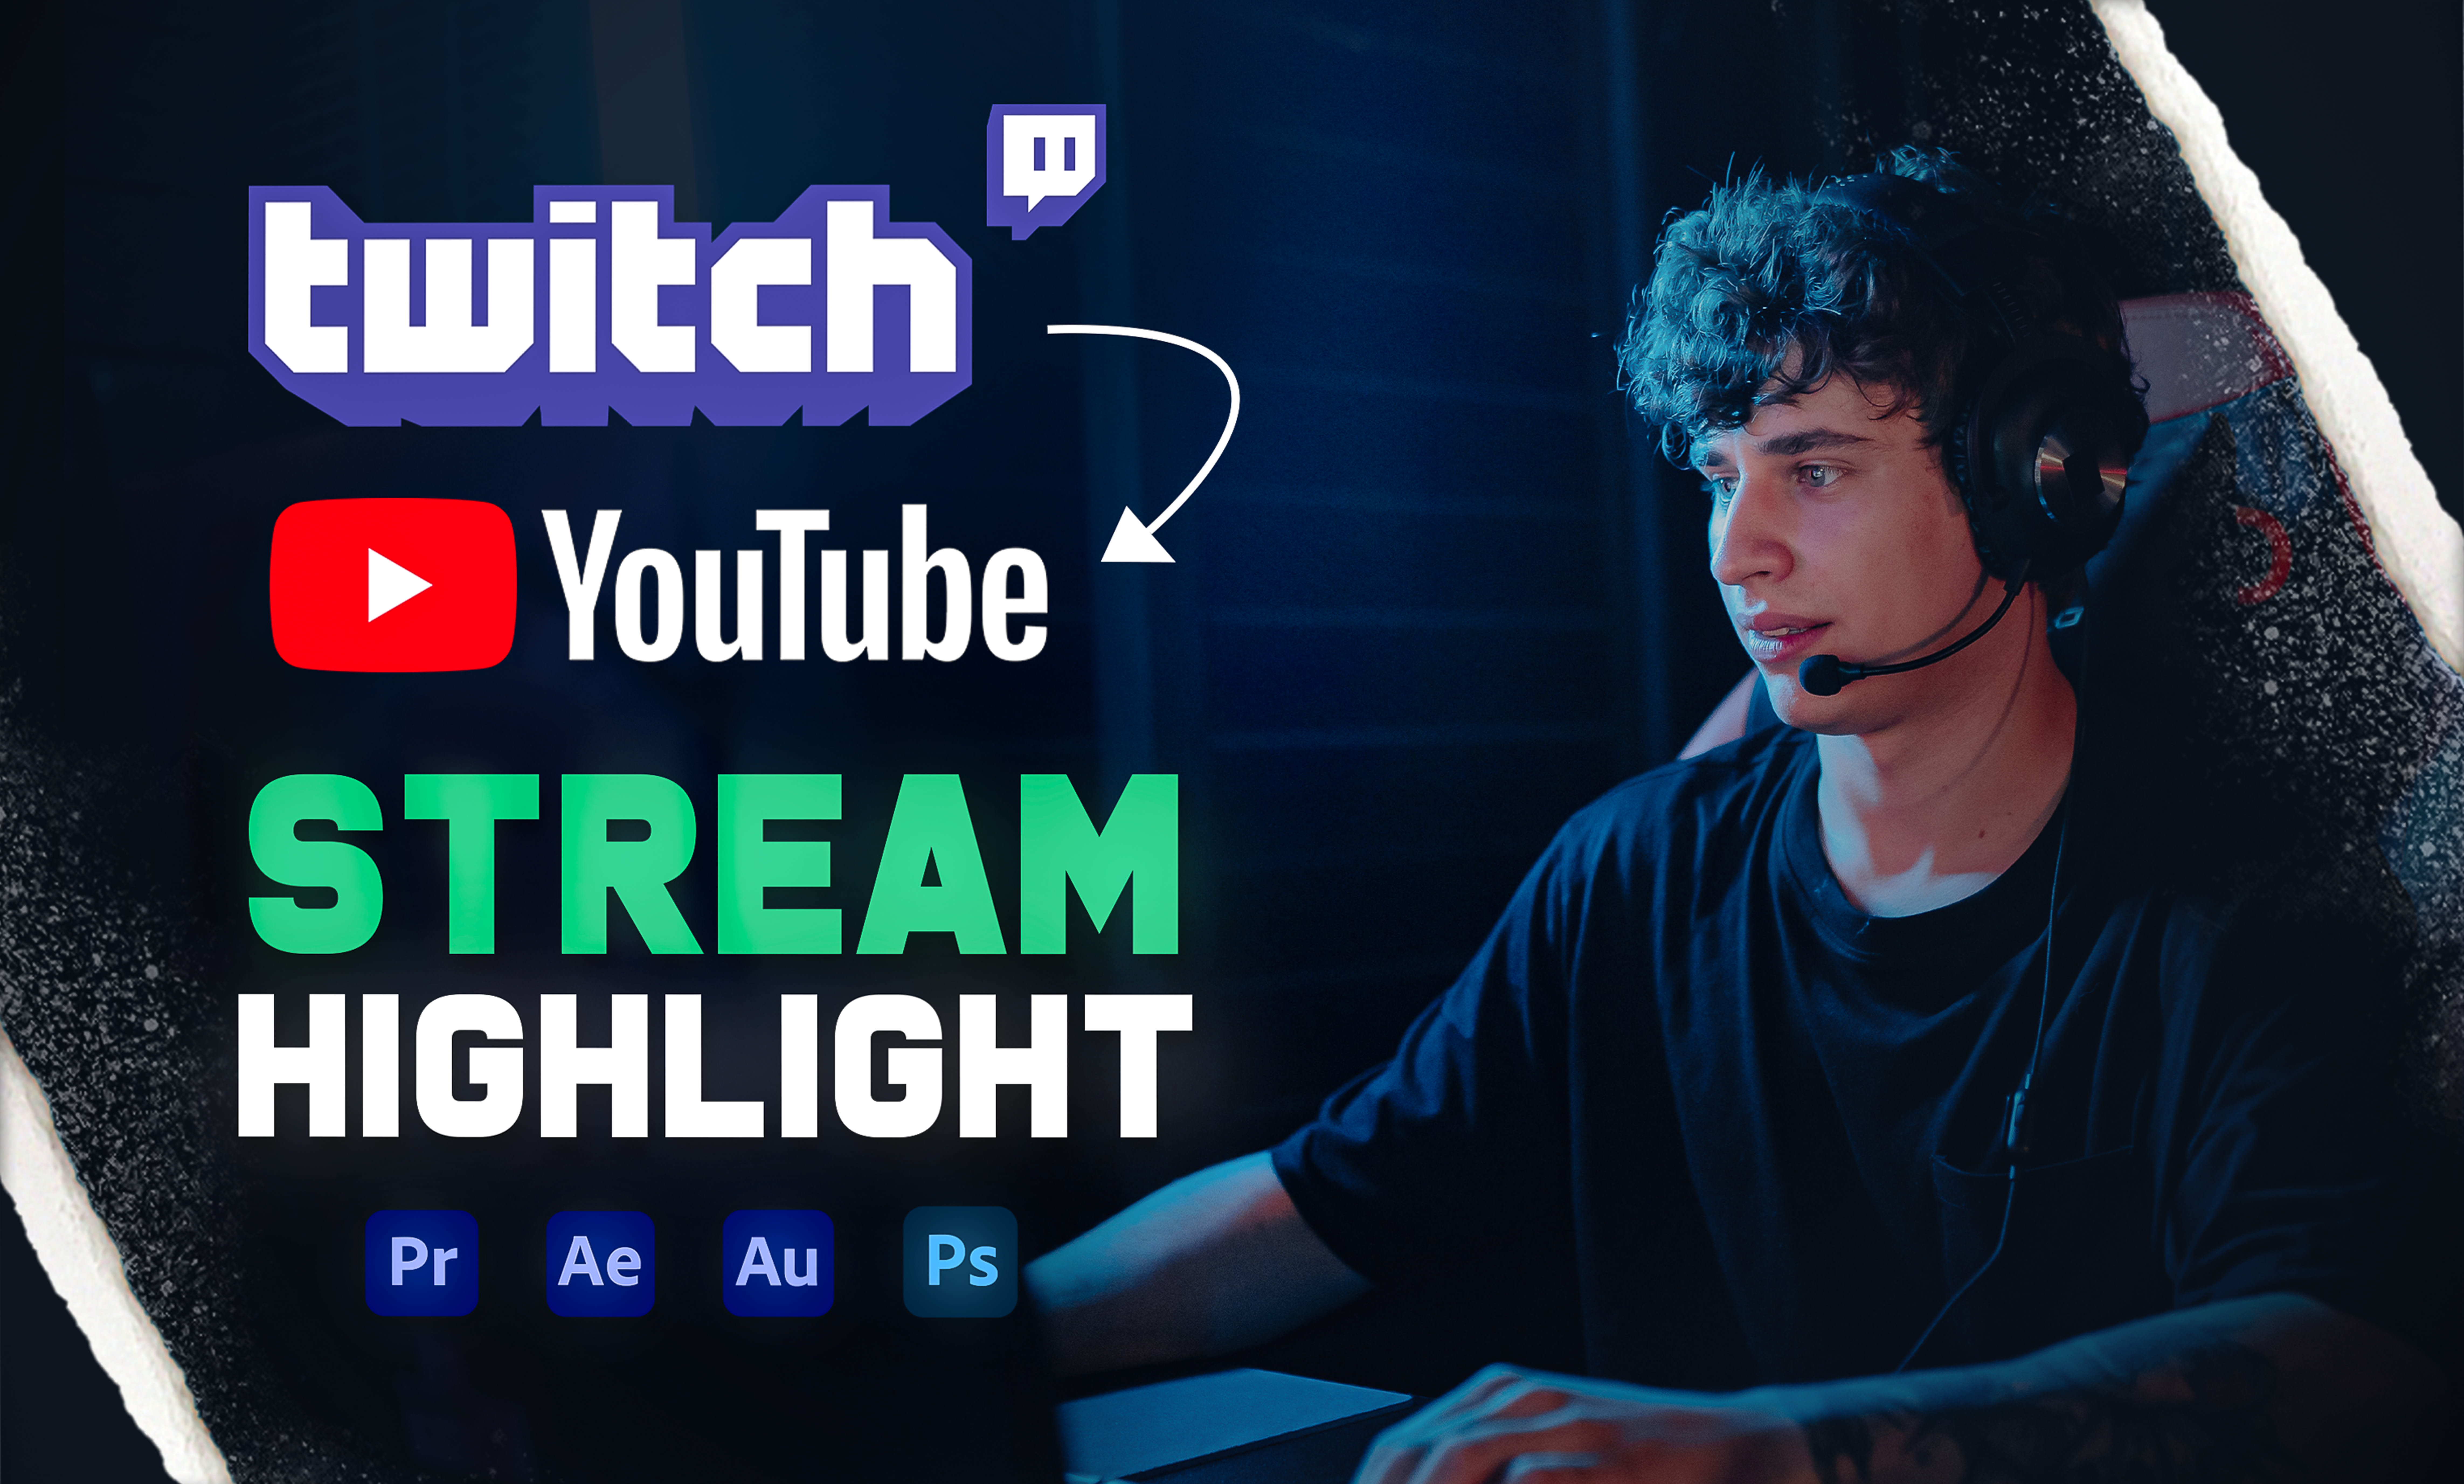 Edit twitch stream into a youtube highlight video by Mridul4567 | Fiverr